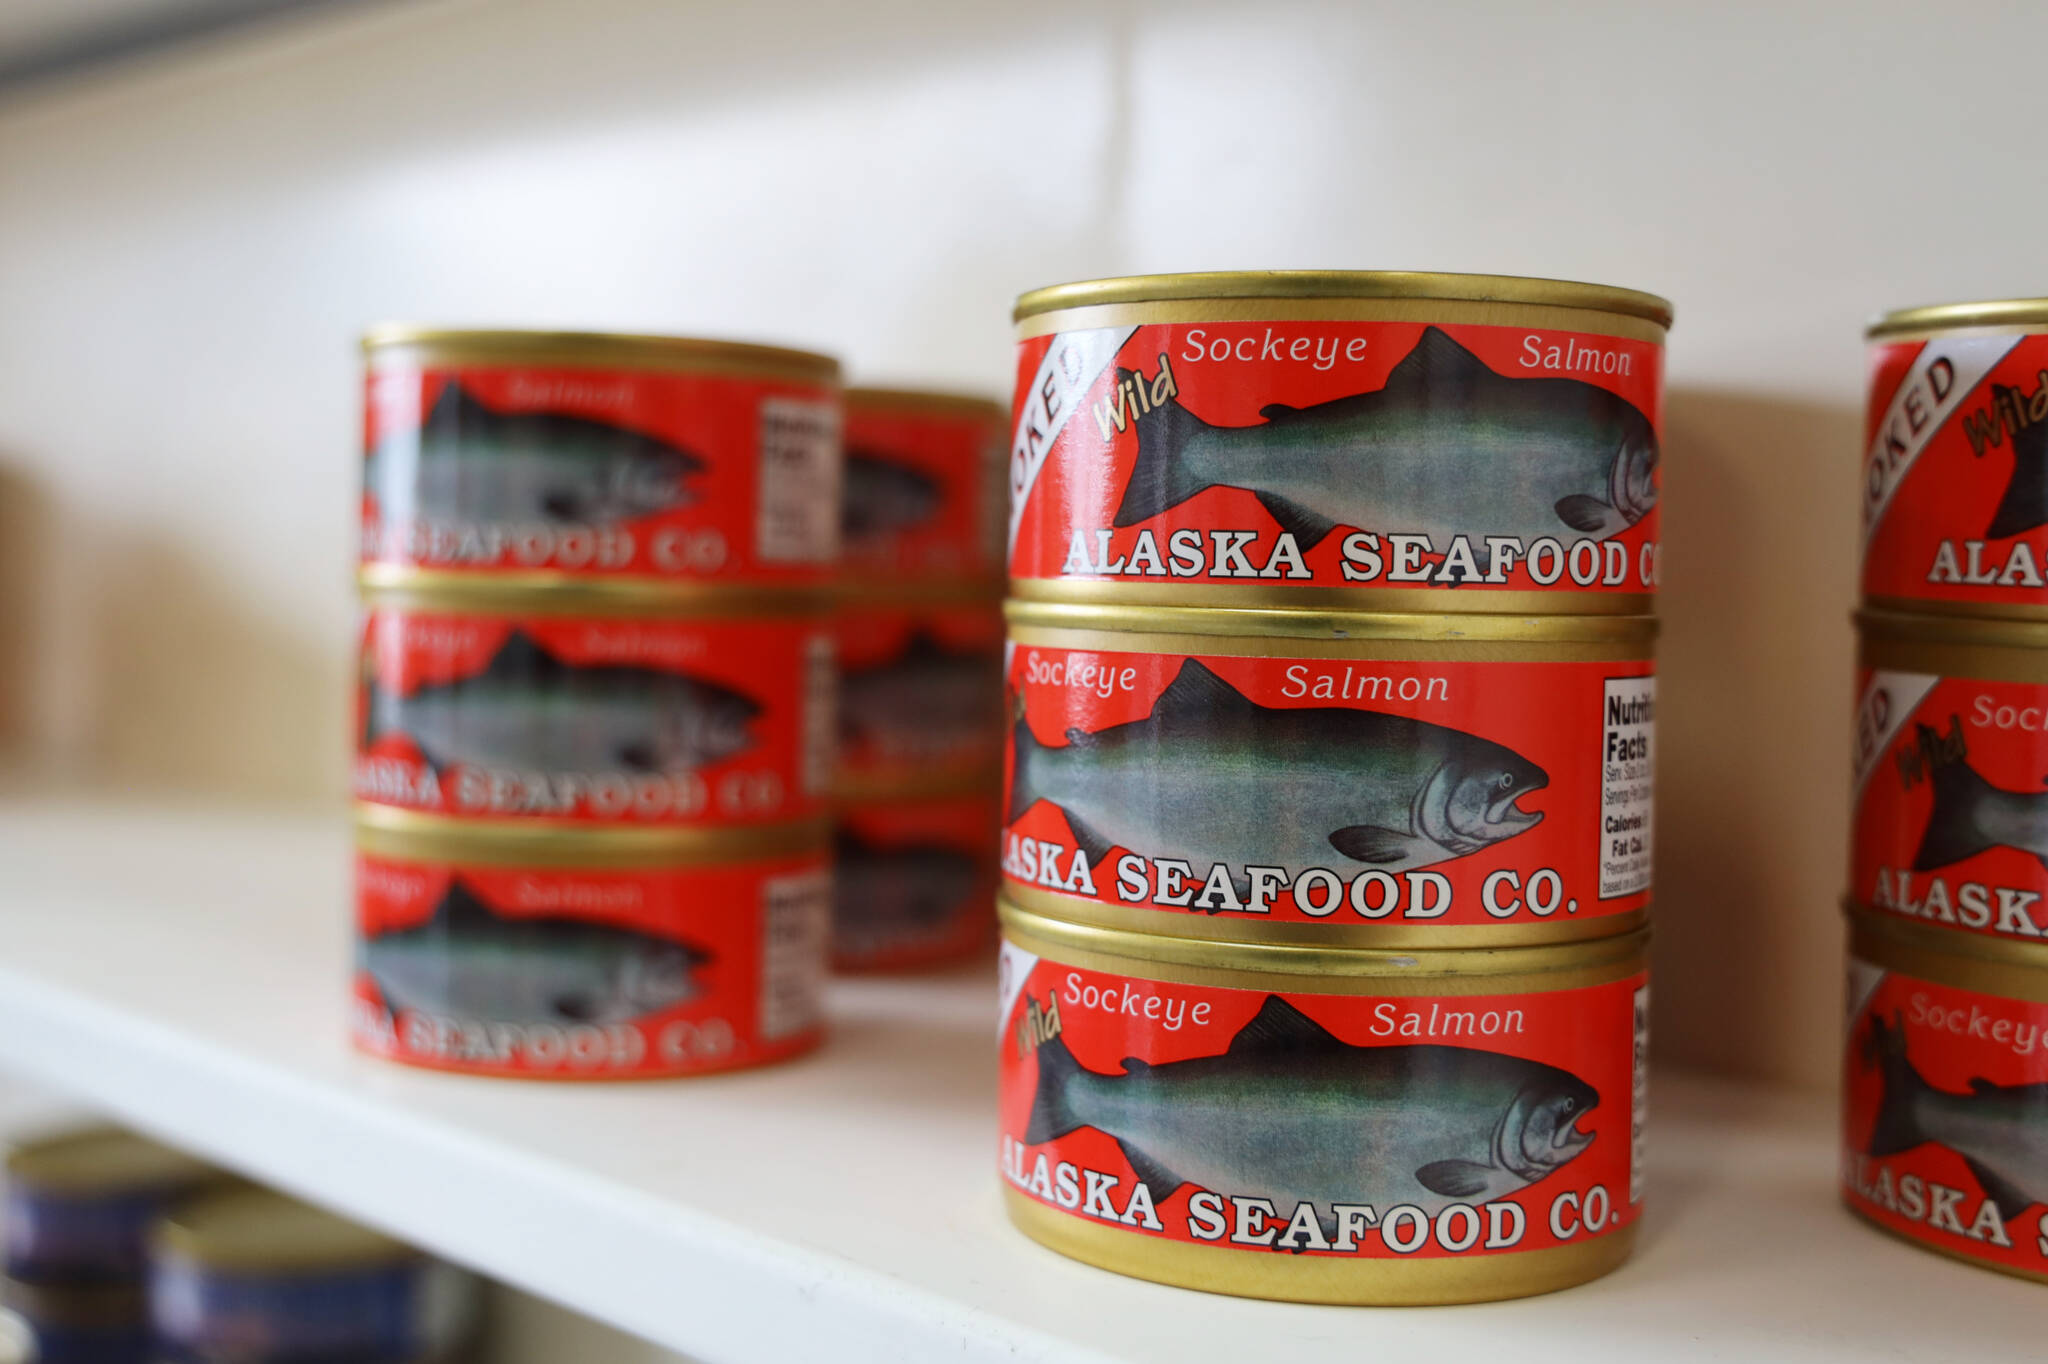 Cans of smoked sockeye salmon line the shelves at the Alaska Seafood Company facility in Lemon Creek. The Central Council of the Tlingit and Haida Indian Tribes of Alaska recently purchased the company and will begin operations by beginning of July, the tribe’s president told the Empire. (Clarise Larson / Juneau Empire)